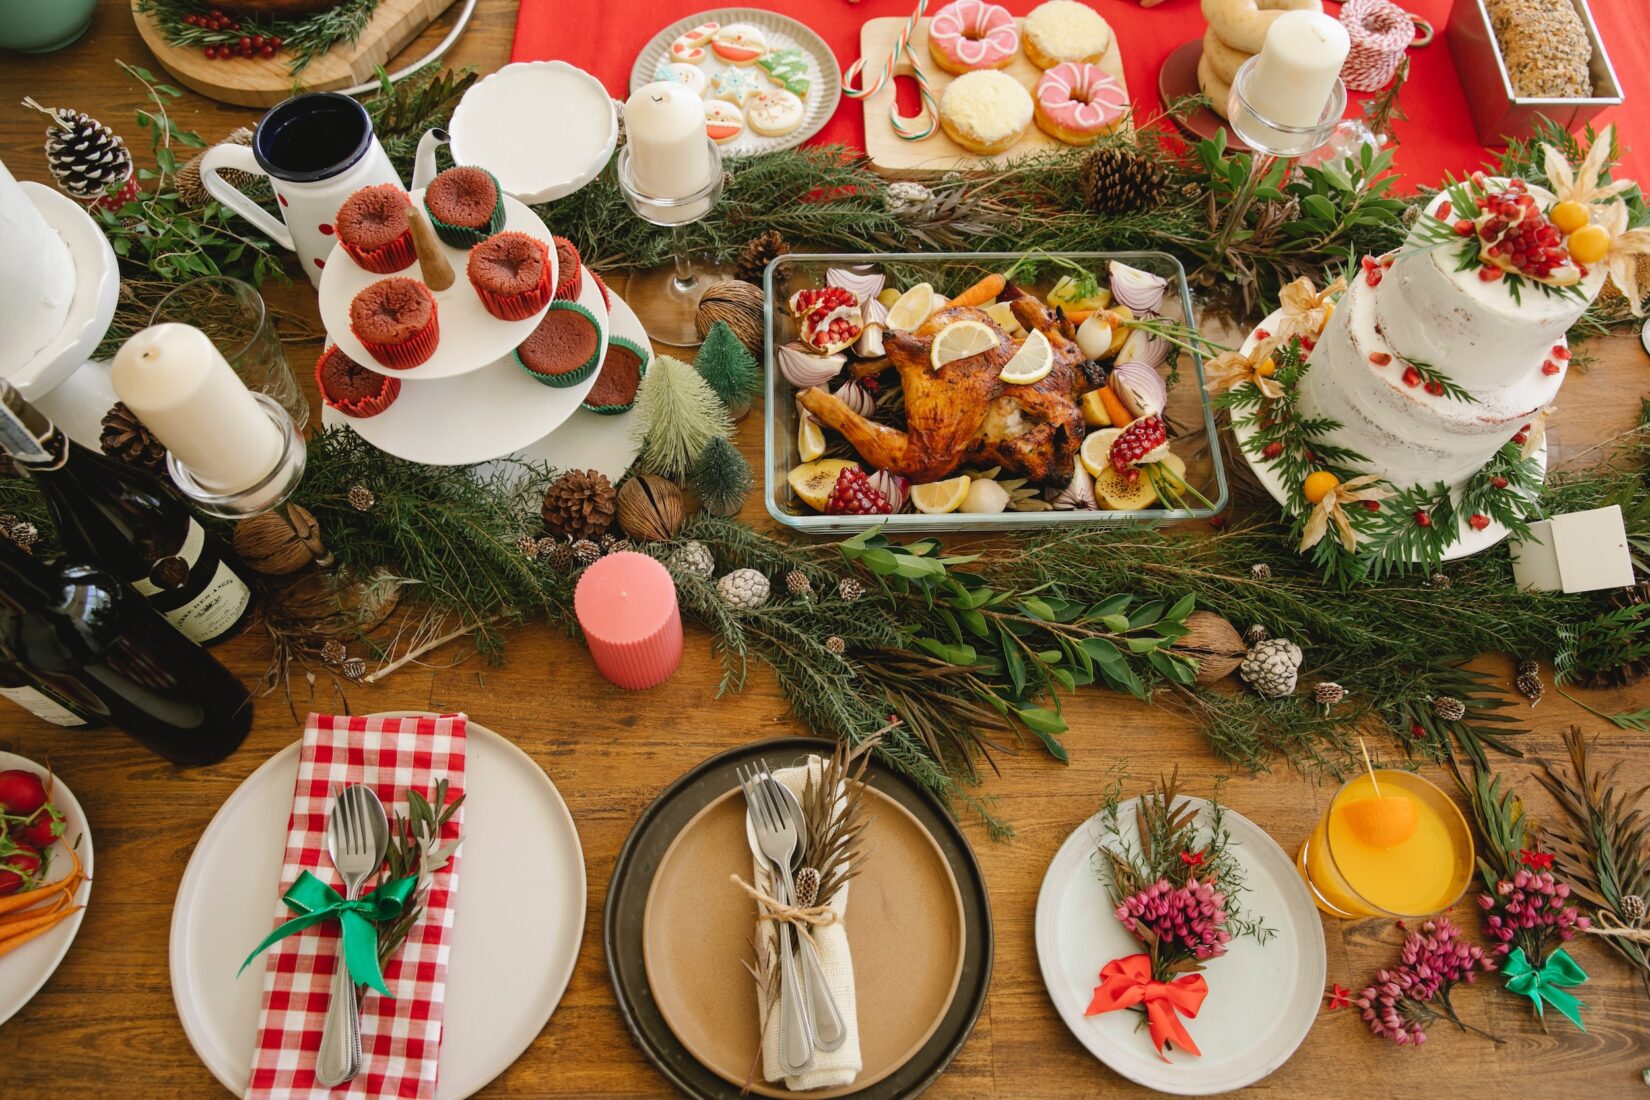 A holiday table with a roasted chicken centerpiece, surrounded by evergreen decorations, a layered cake, cupcakes, and colorful table settings.